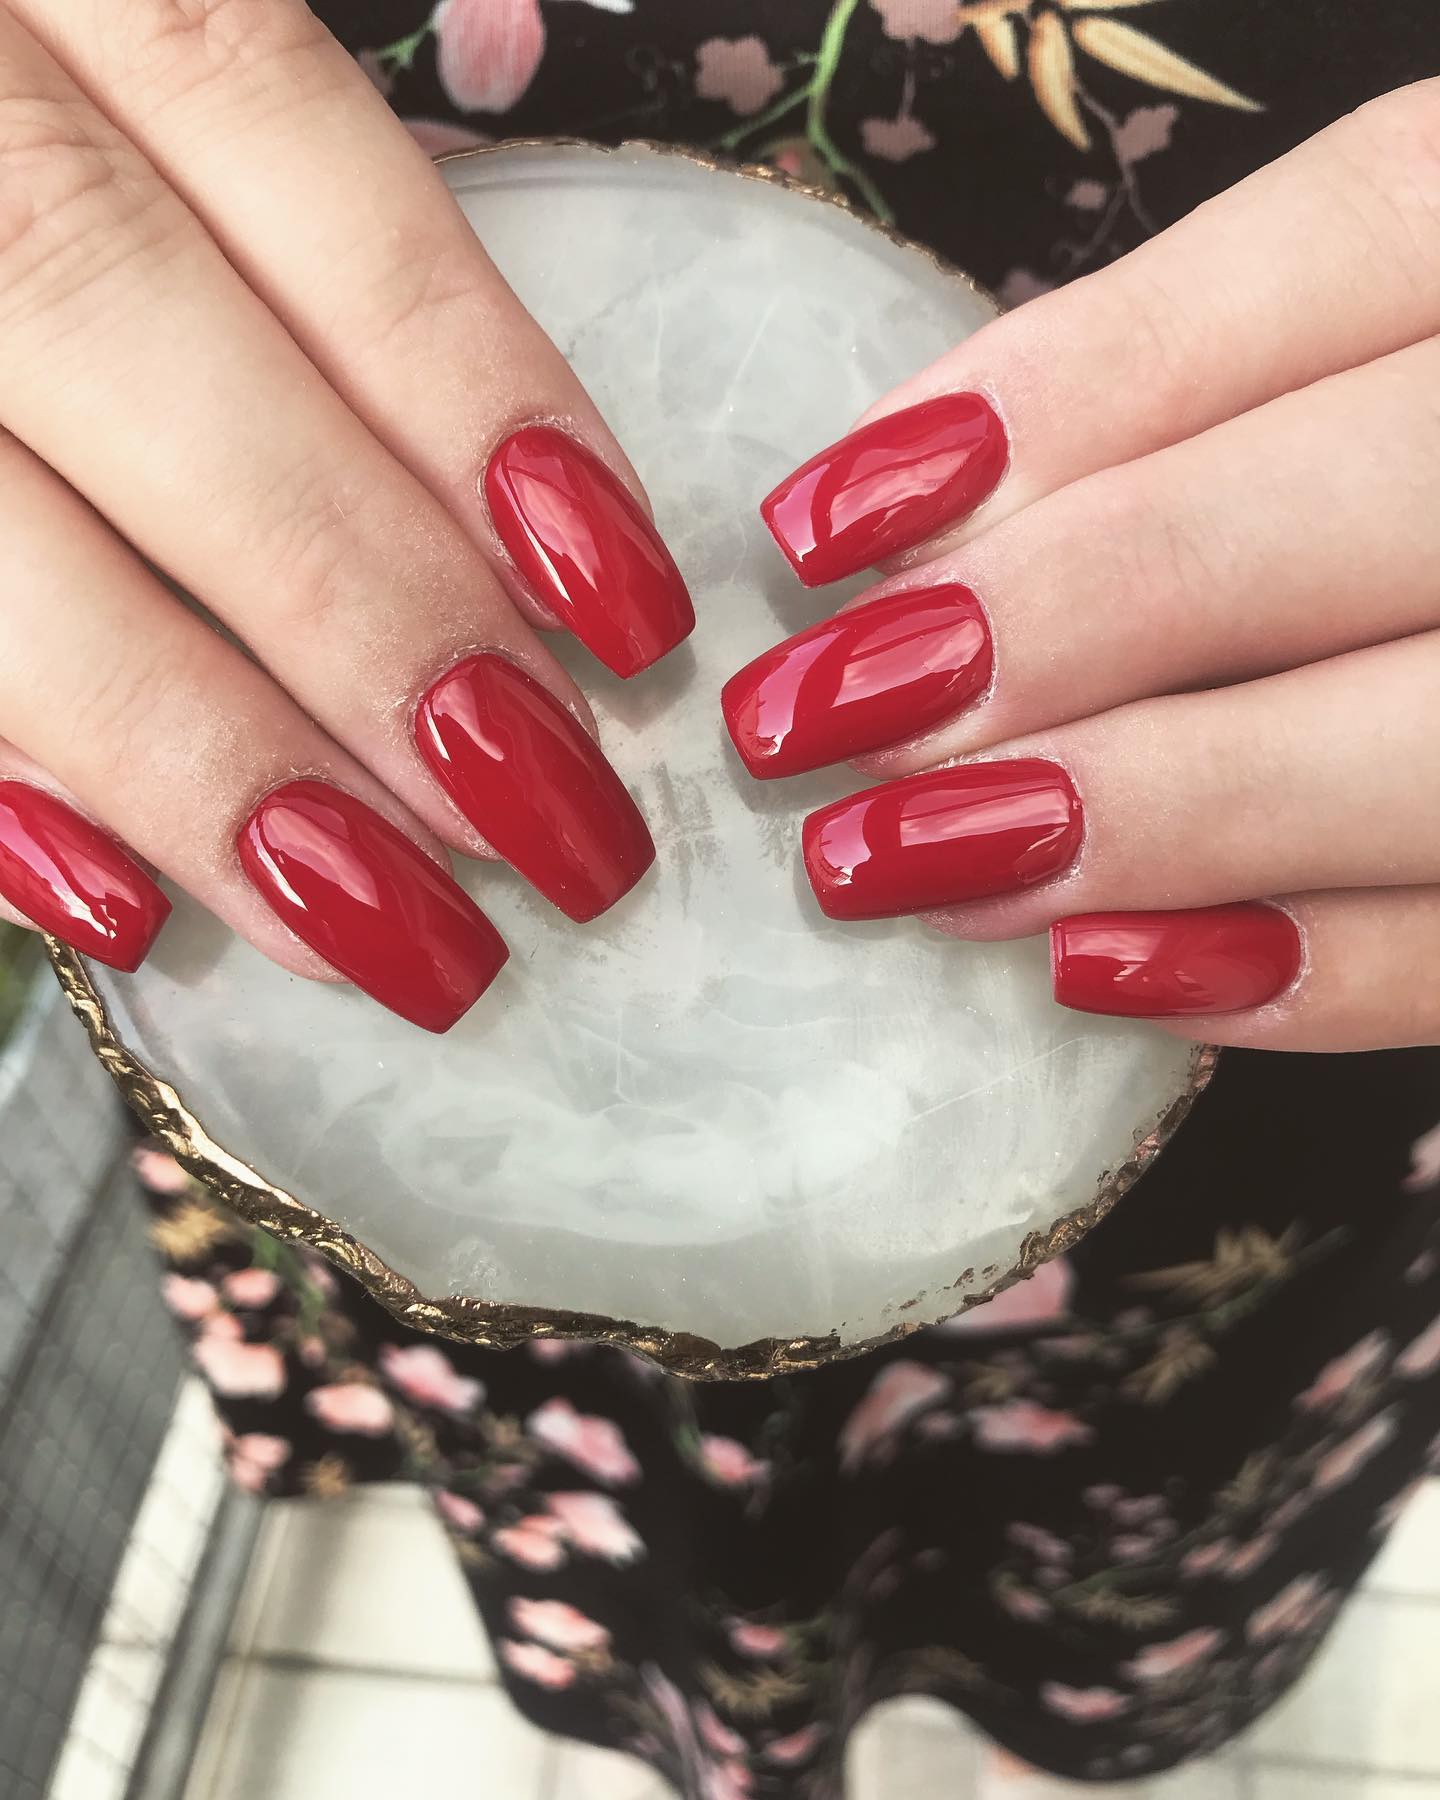 Is there a sexier color than red? Nope. Just a plain and bright red nail design is enough to shine.